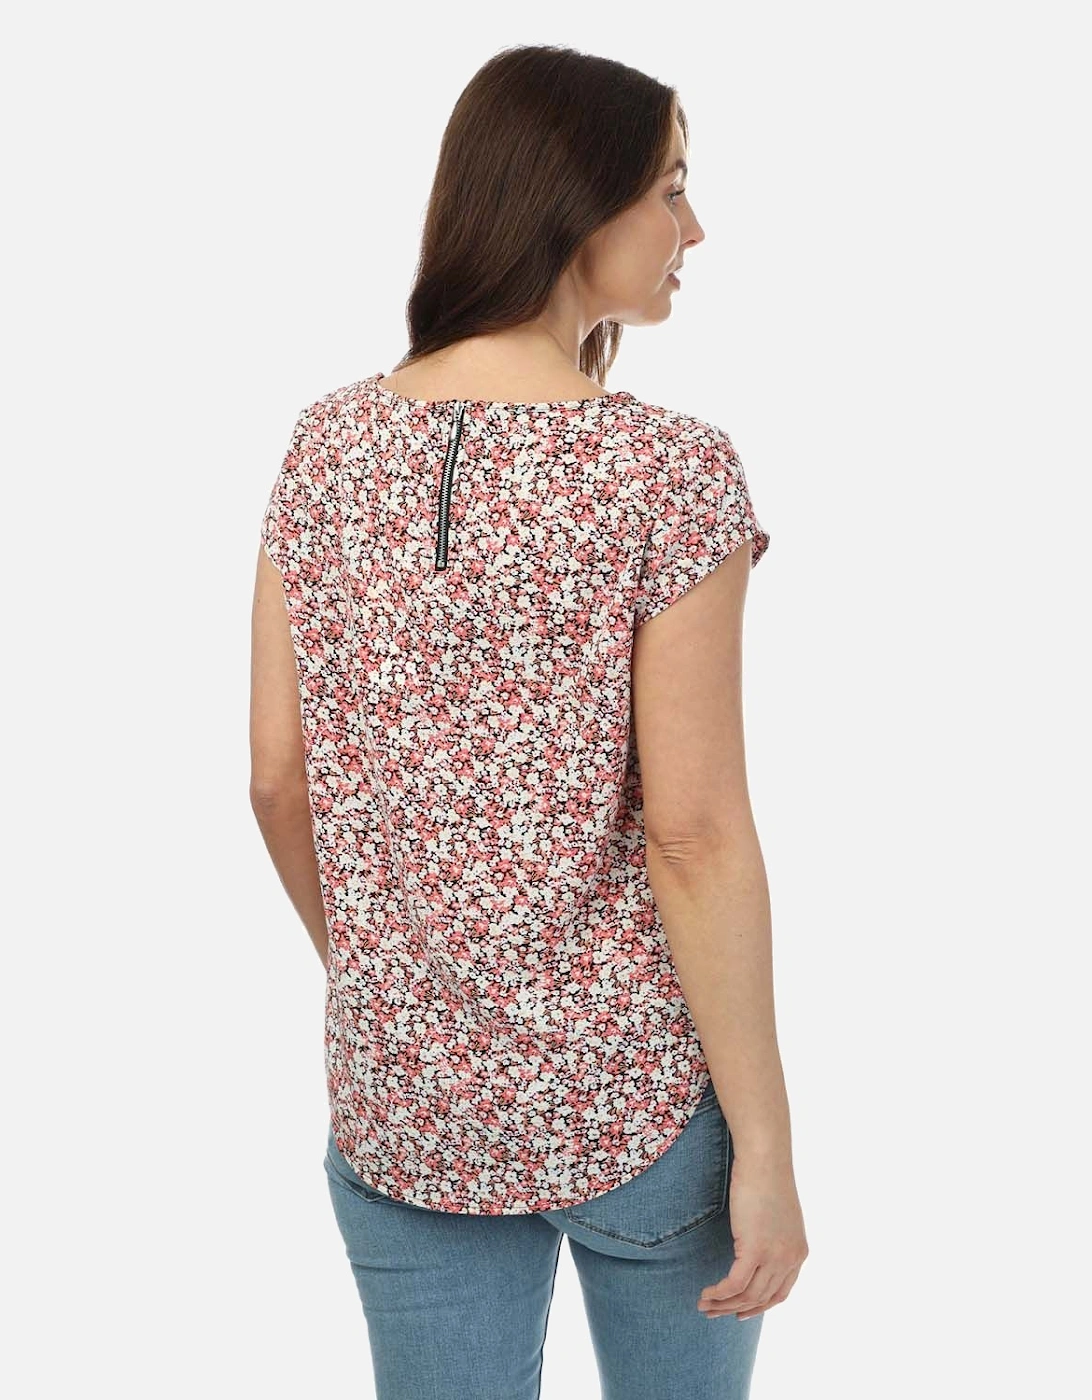 Womens Vic Short Sleeve Floral Top